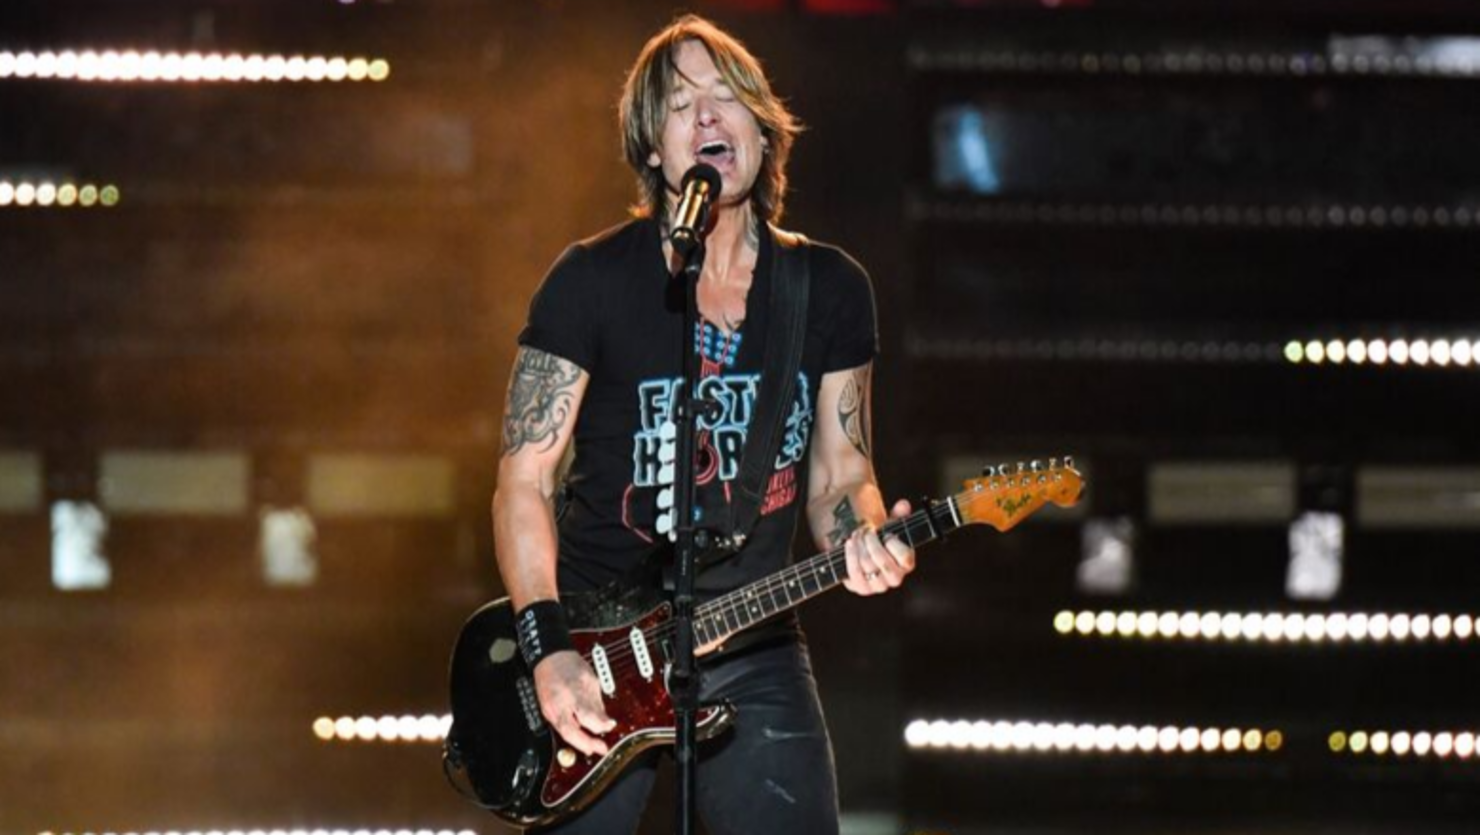 Keith Urban Announces New Tour With UK Dates For 2020